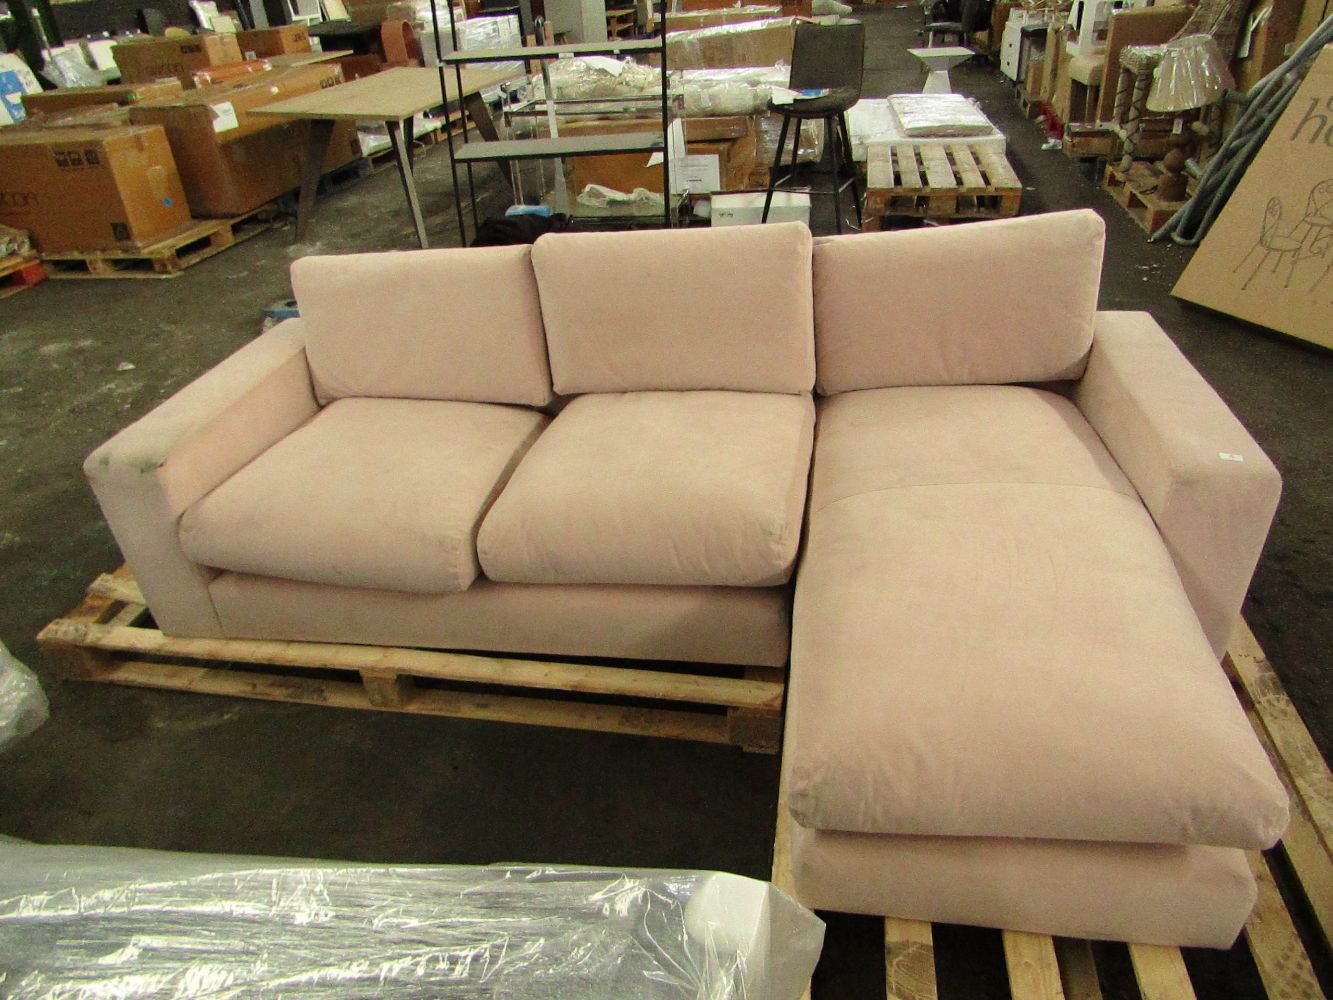 Refurbed and Raw customer return Sofas from Swoon, Cavendish, HSL, Costco and More